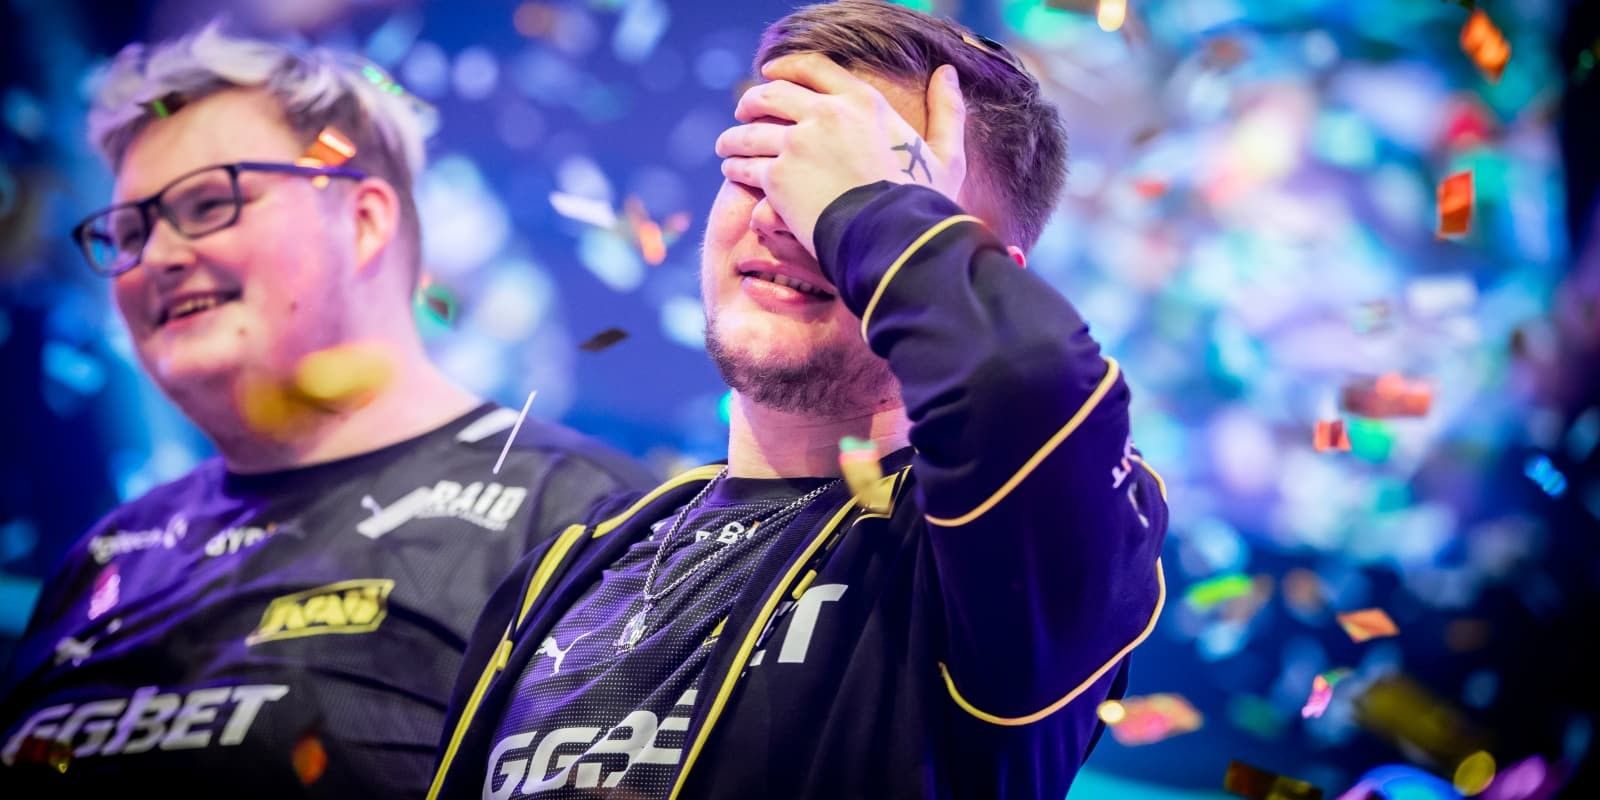 S1mple Is The Best Esports Athlete Of 2021 – Here’s Why